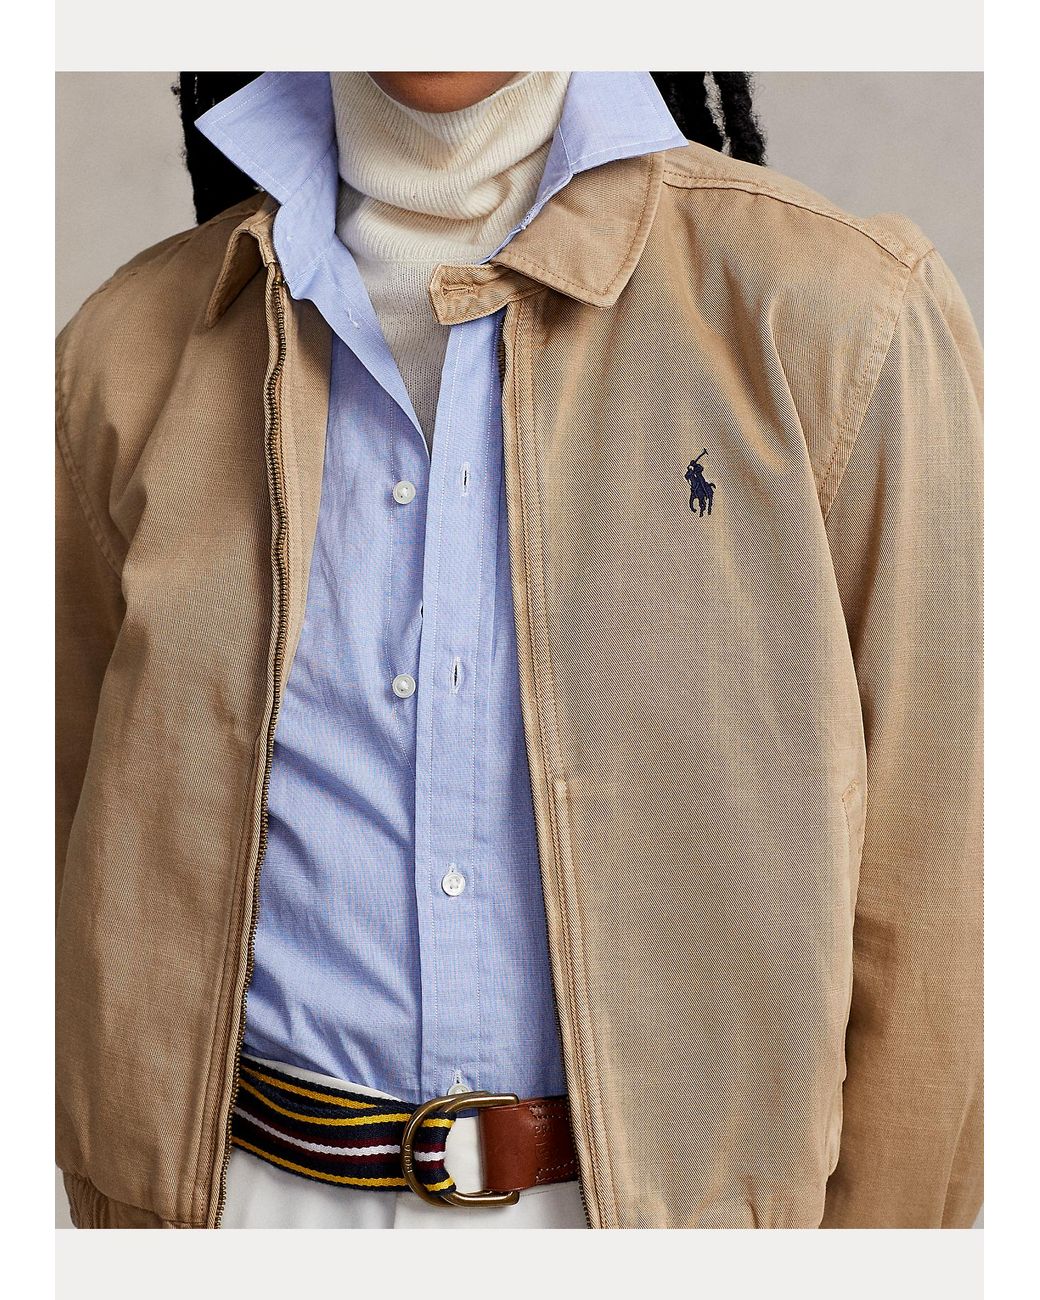 Polo Ralph Lauren Cotton Chino Jacket in Natural | Lyst UK